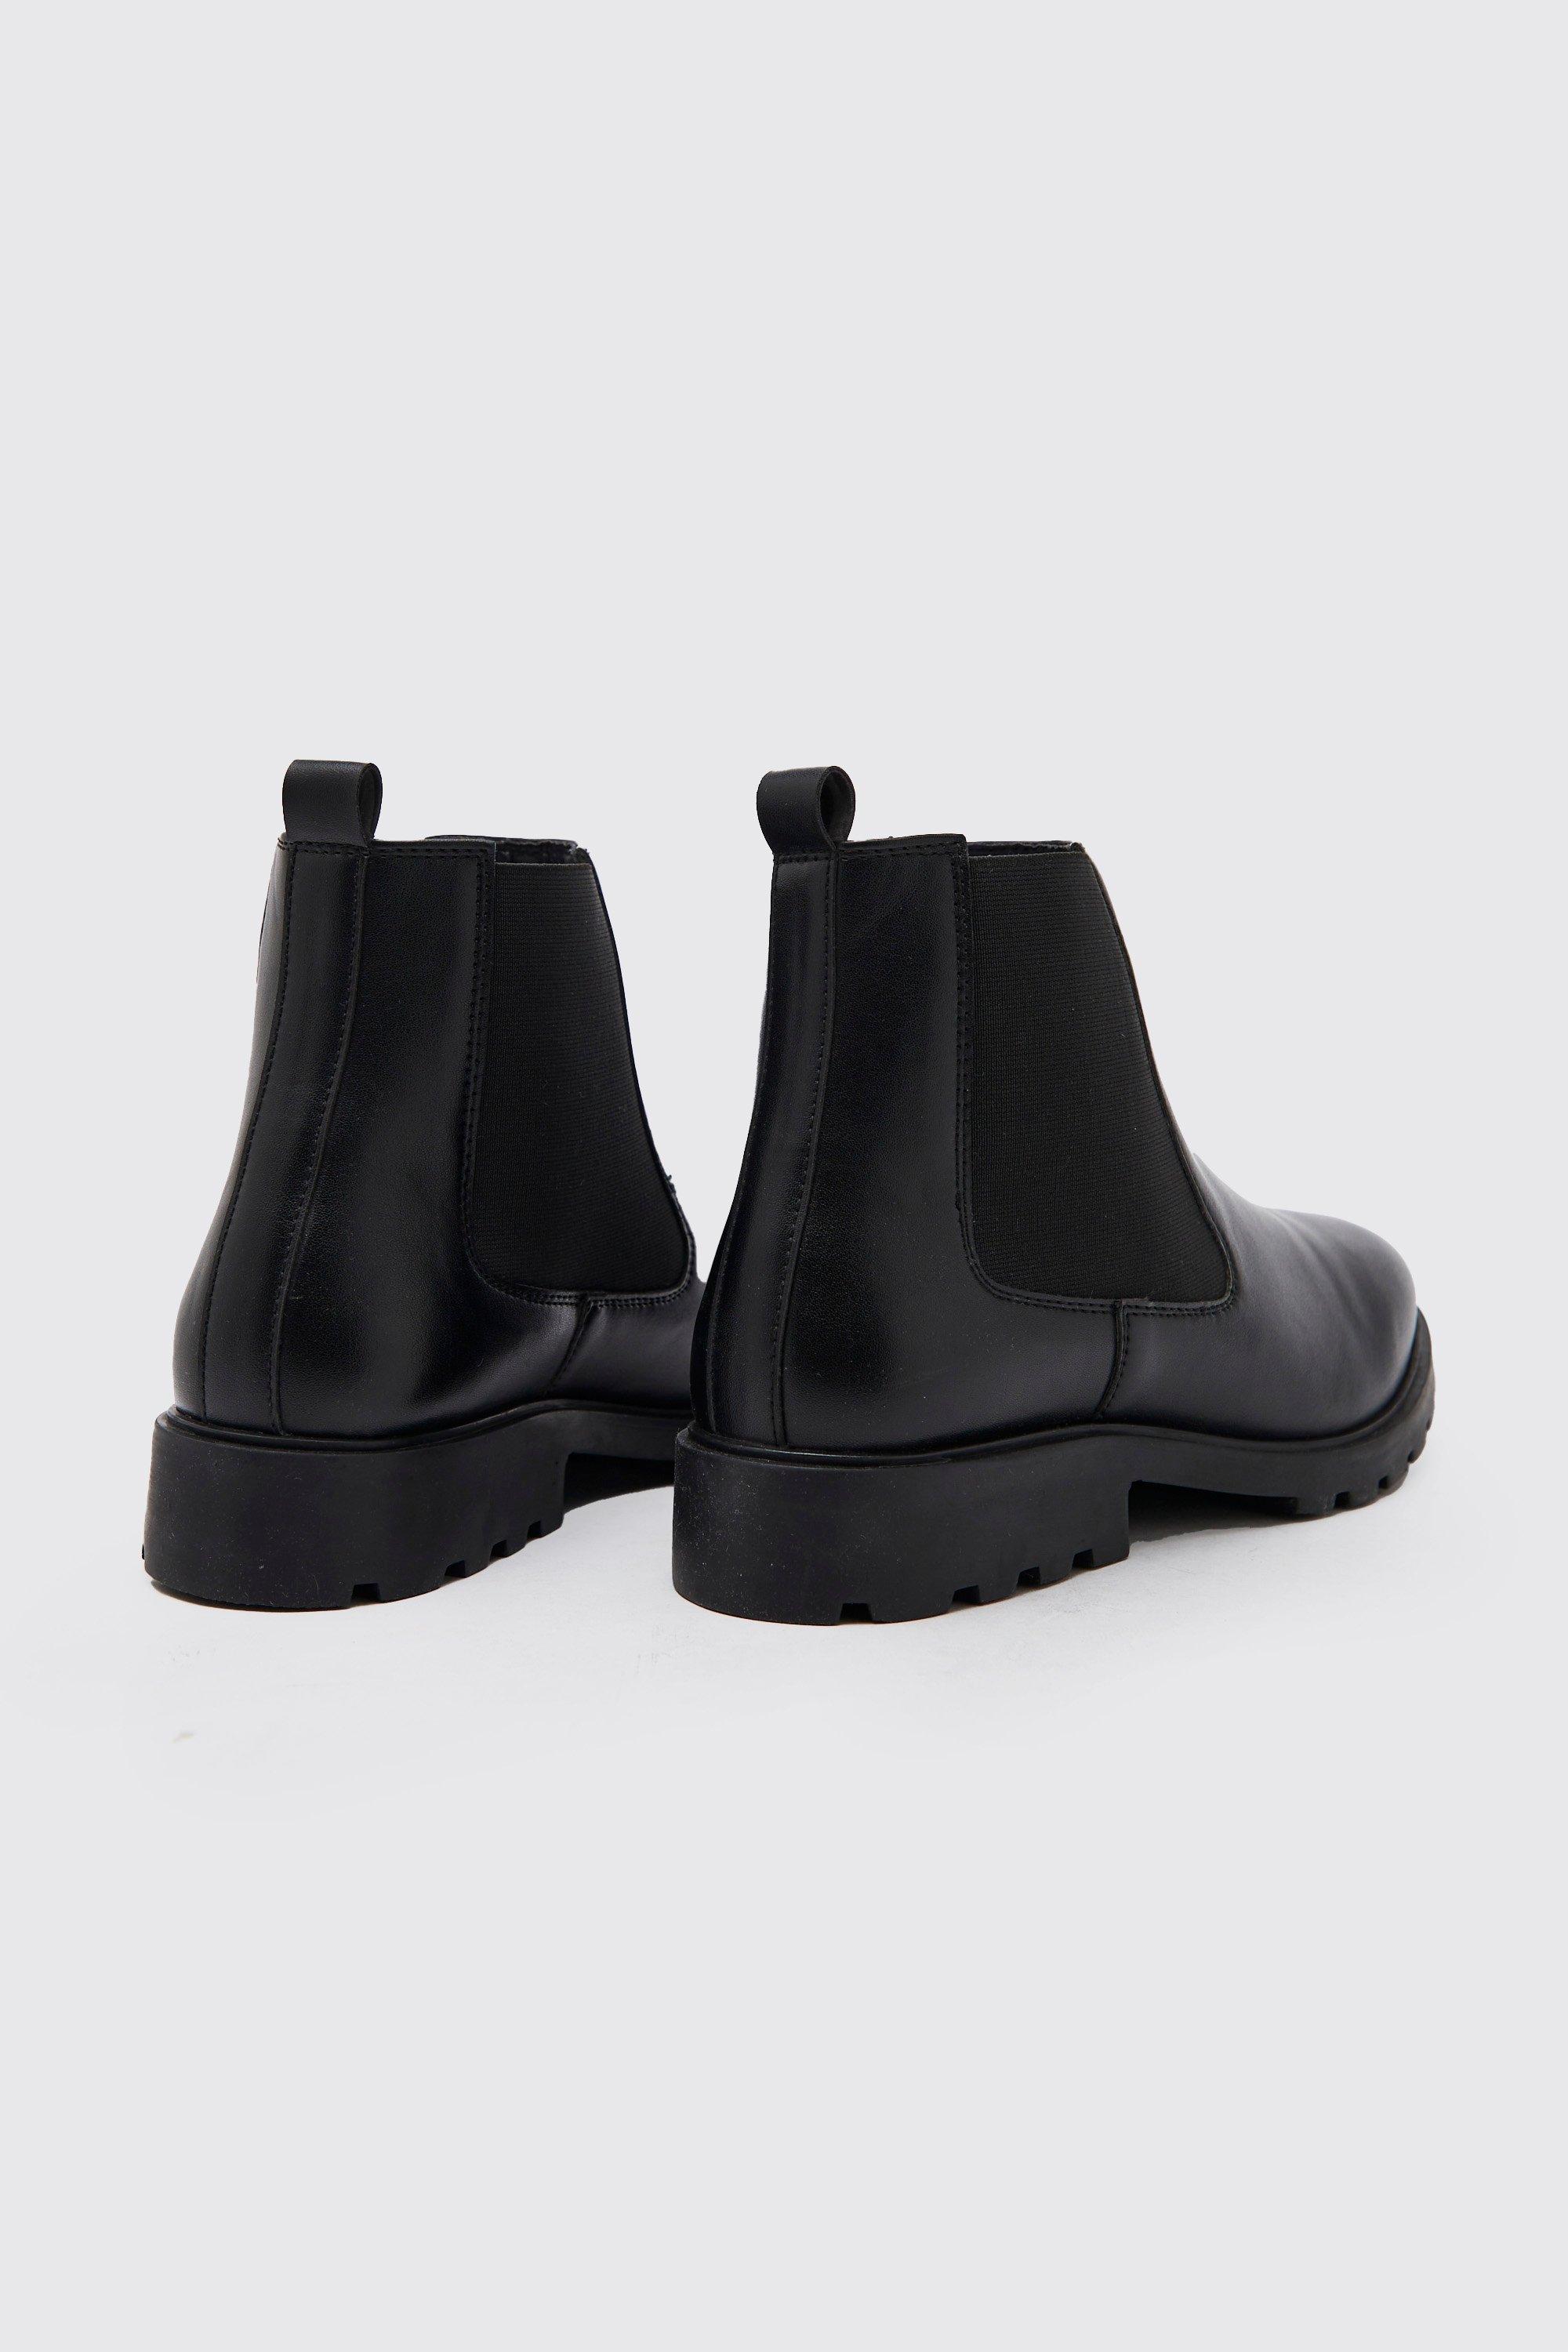 Rectangle Dominant calcium Angled Gusset Chelsea Boot | boohoo